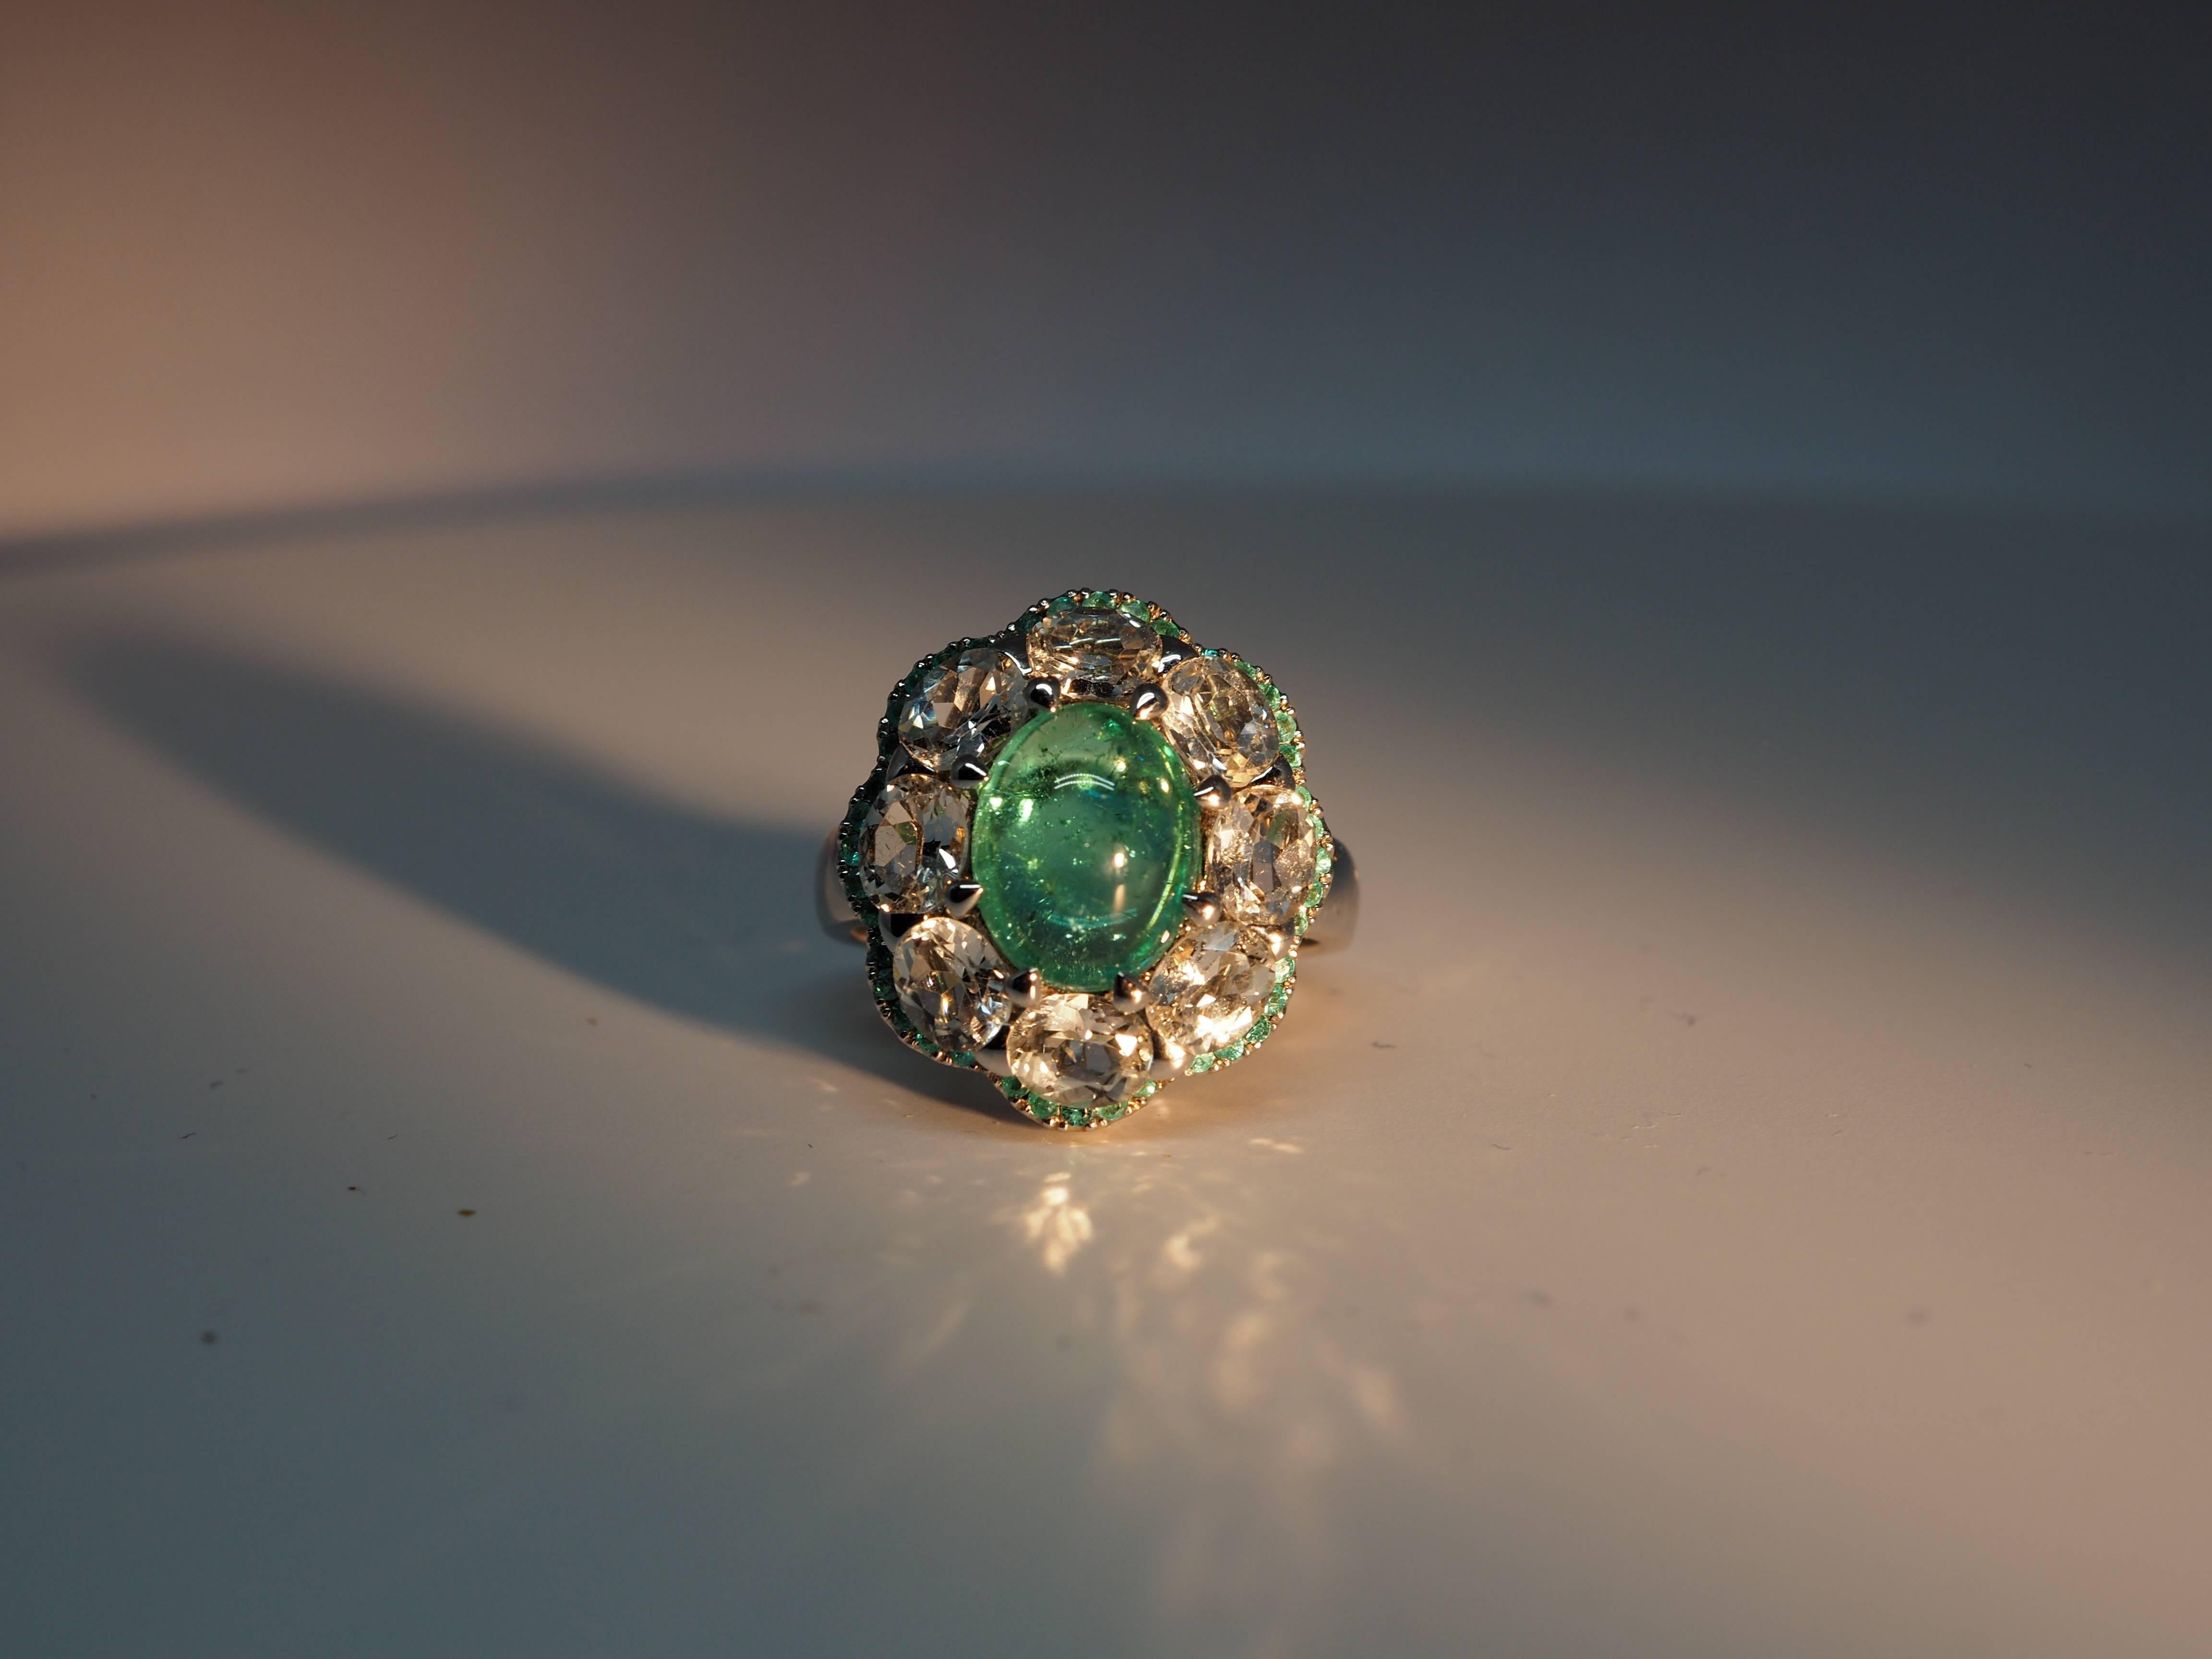 Thomas Leyser is renowned for his contemporary jewellery designs utilizing fine coloured gemstones and diamonds. 

This ring in 18k white gold is set with one Paraiba Tourmaline Cabouchon in top quality and precious facetted topaz, as well as 40